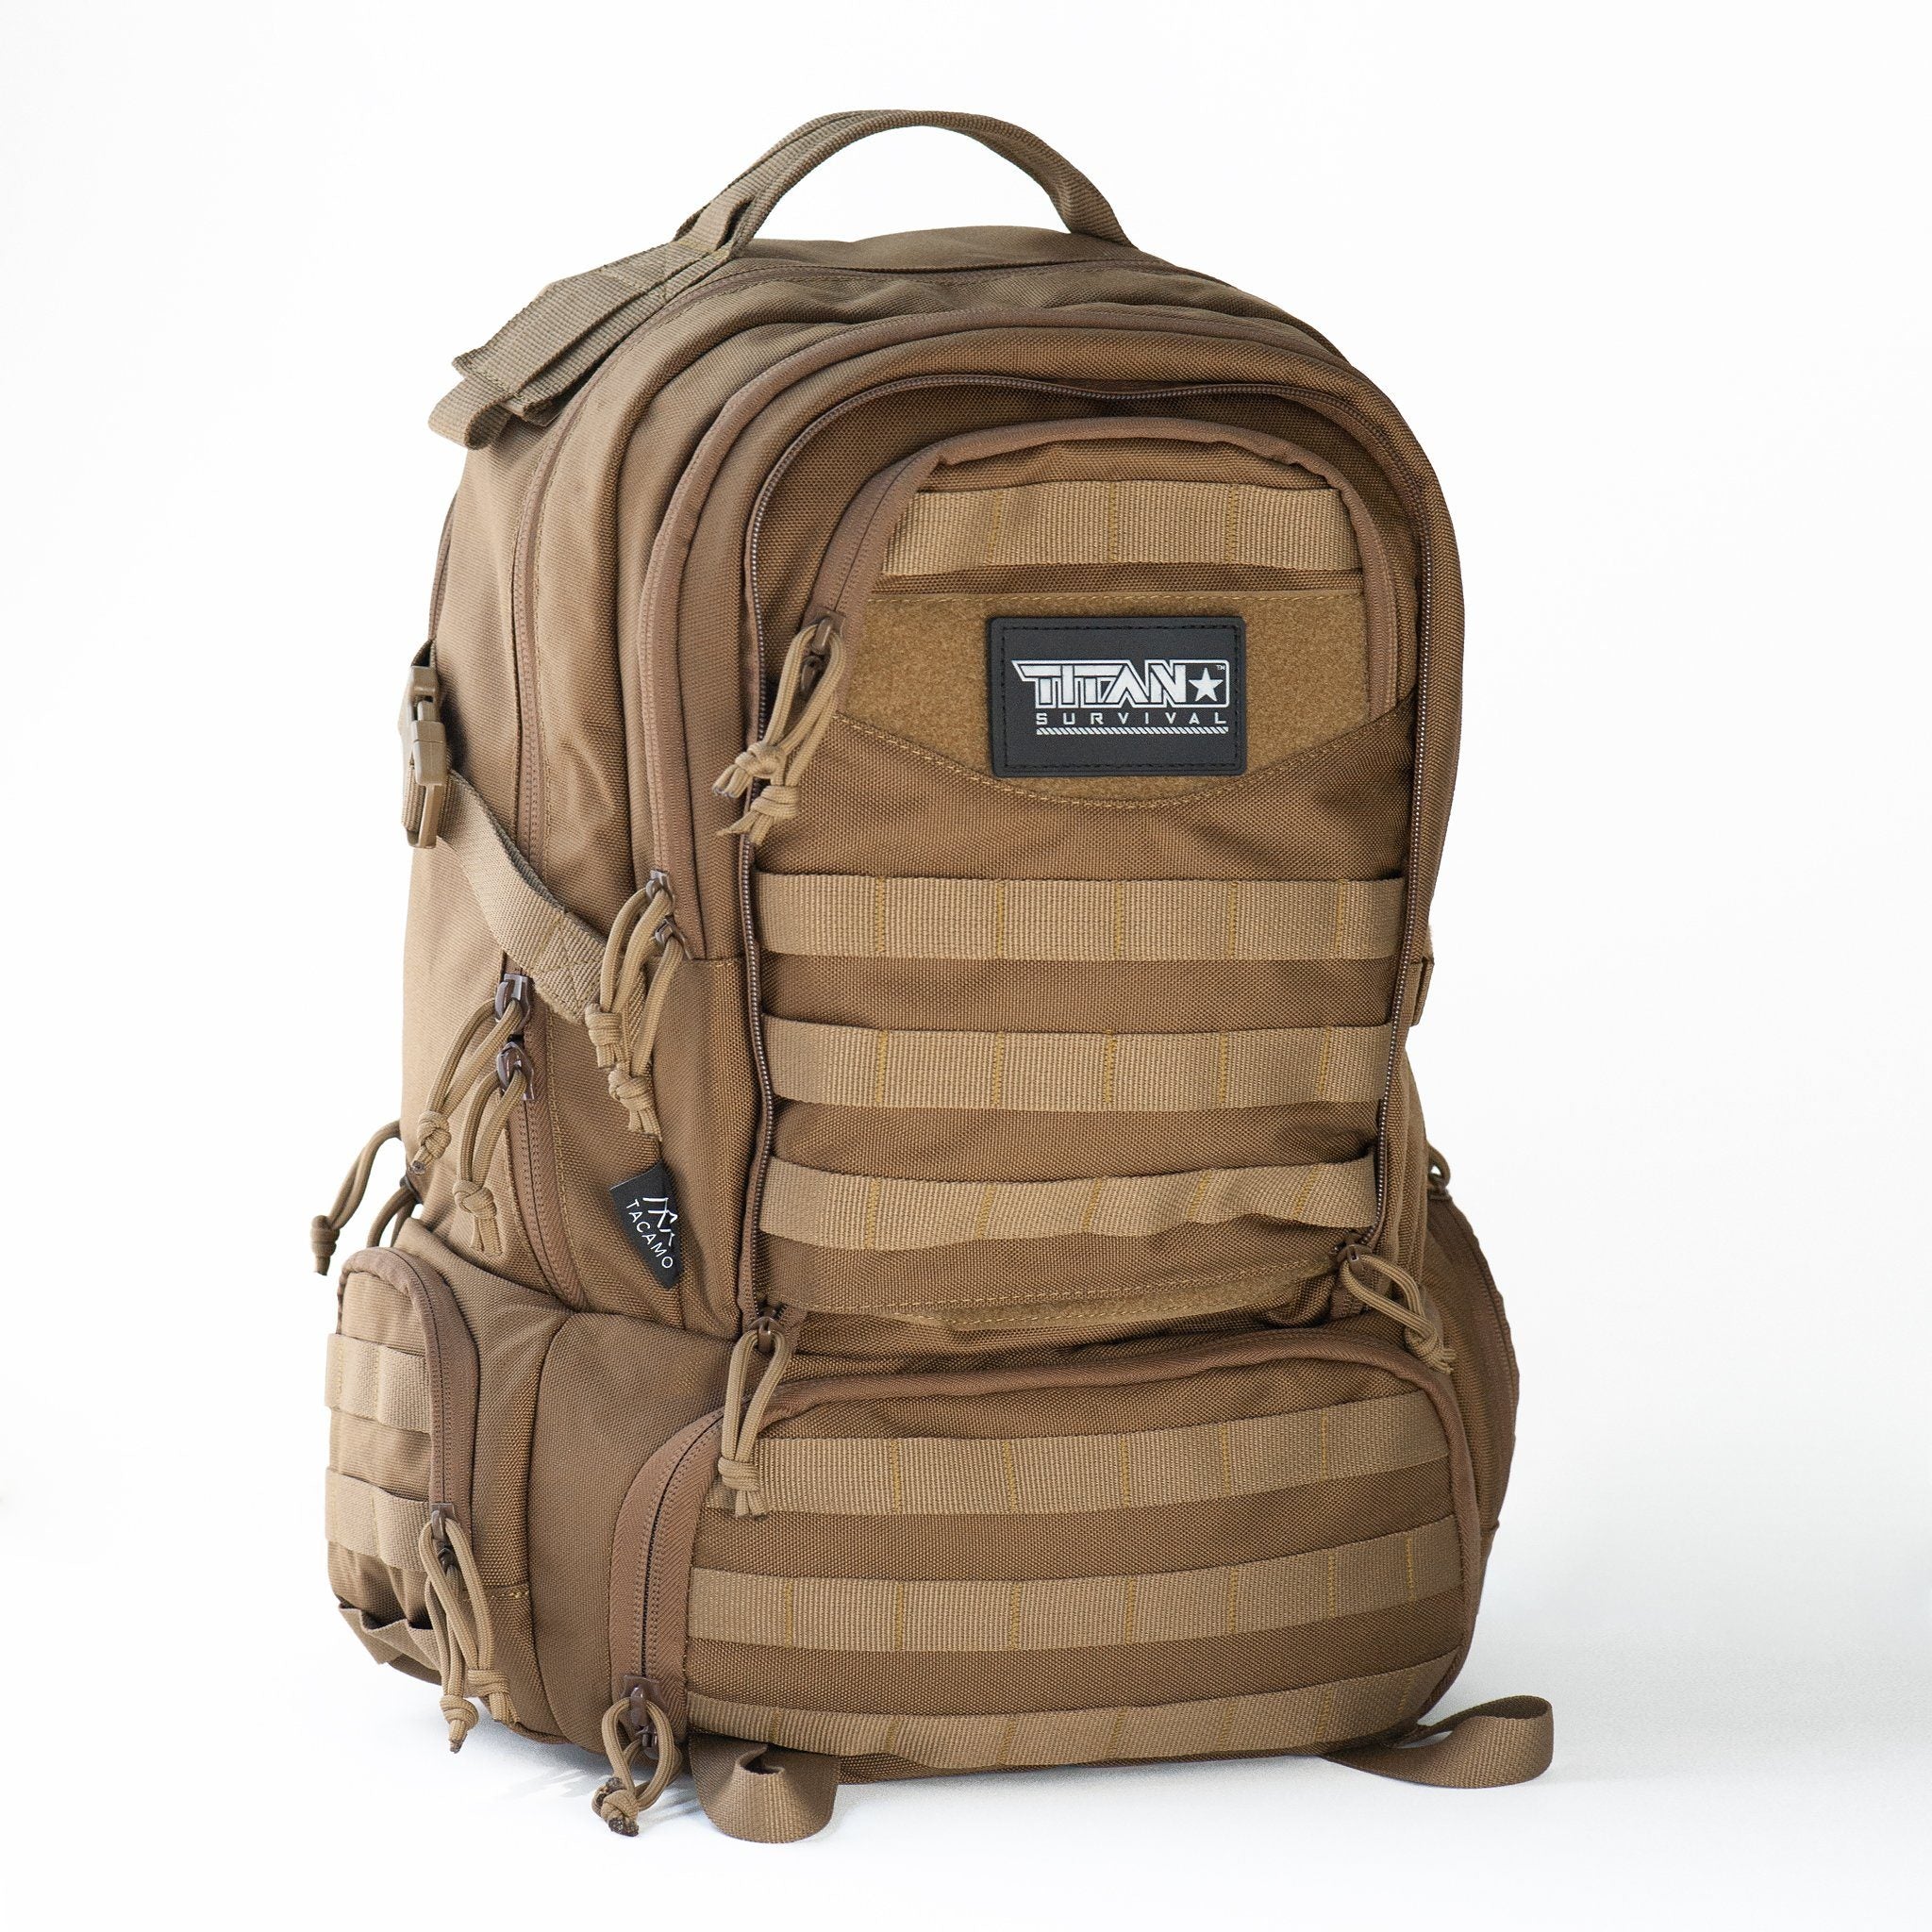 BC50 72-Hour Tactical Backpack | TITAN Survival